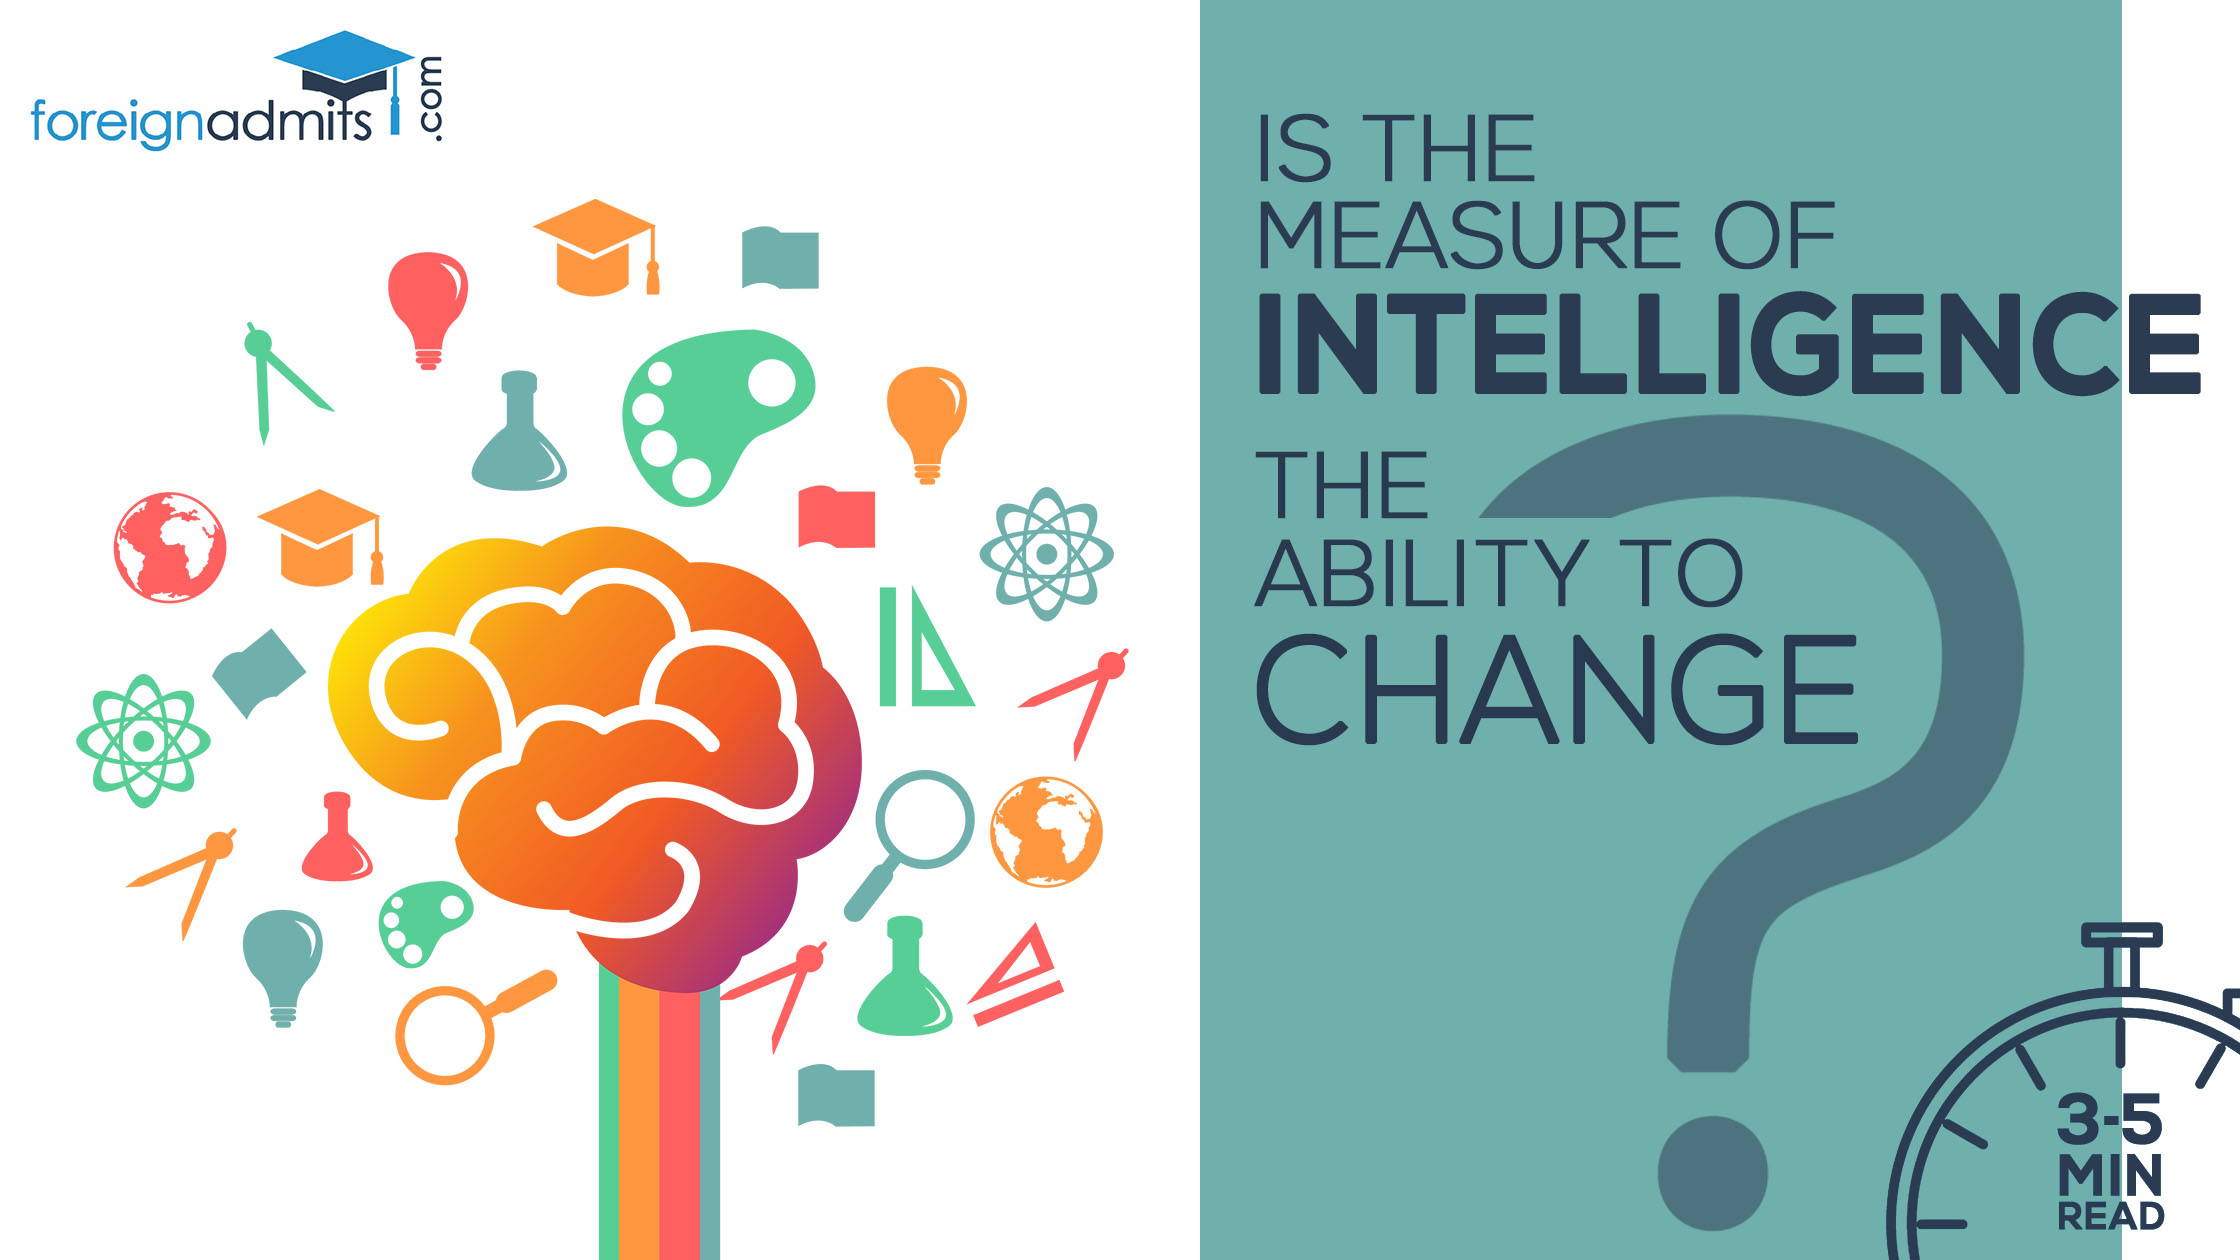 Is the Measure of Intelligence is the Ability to Change?